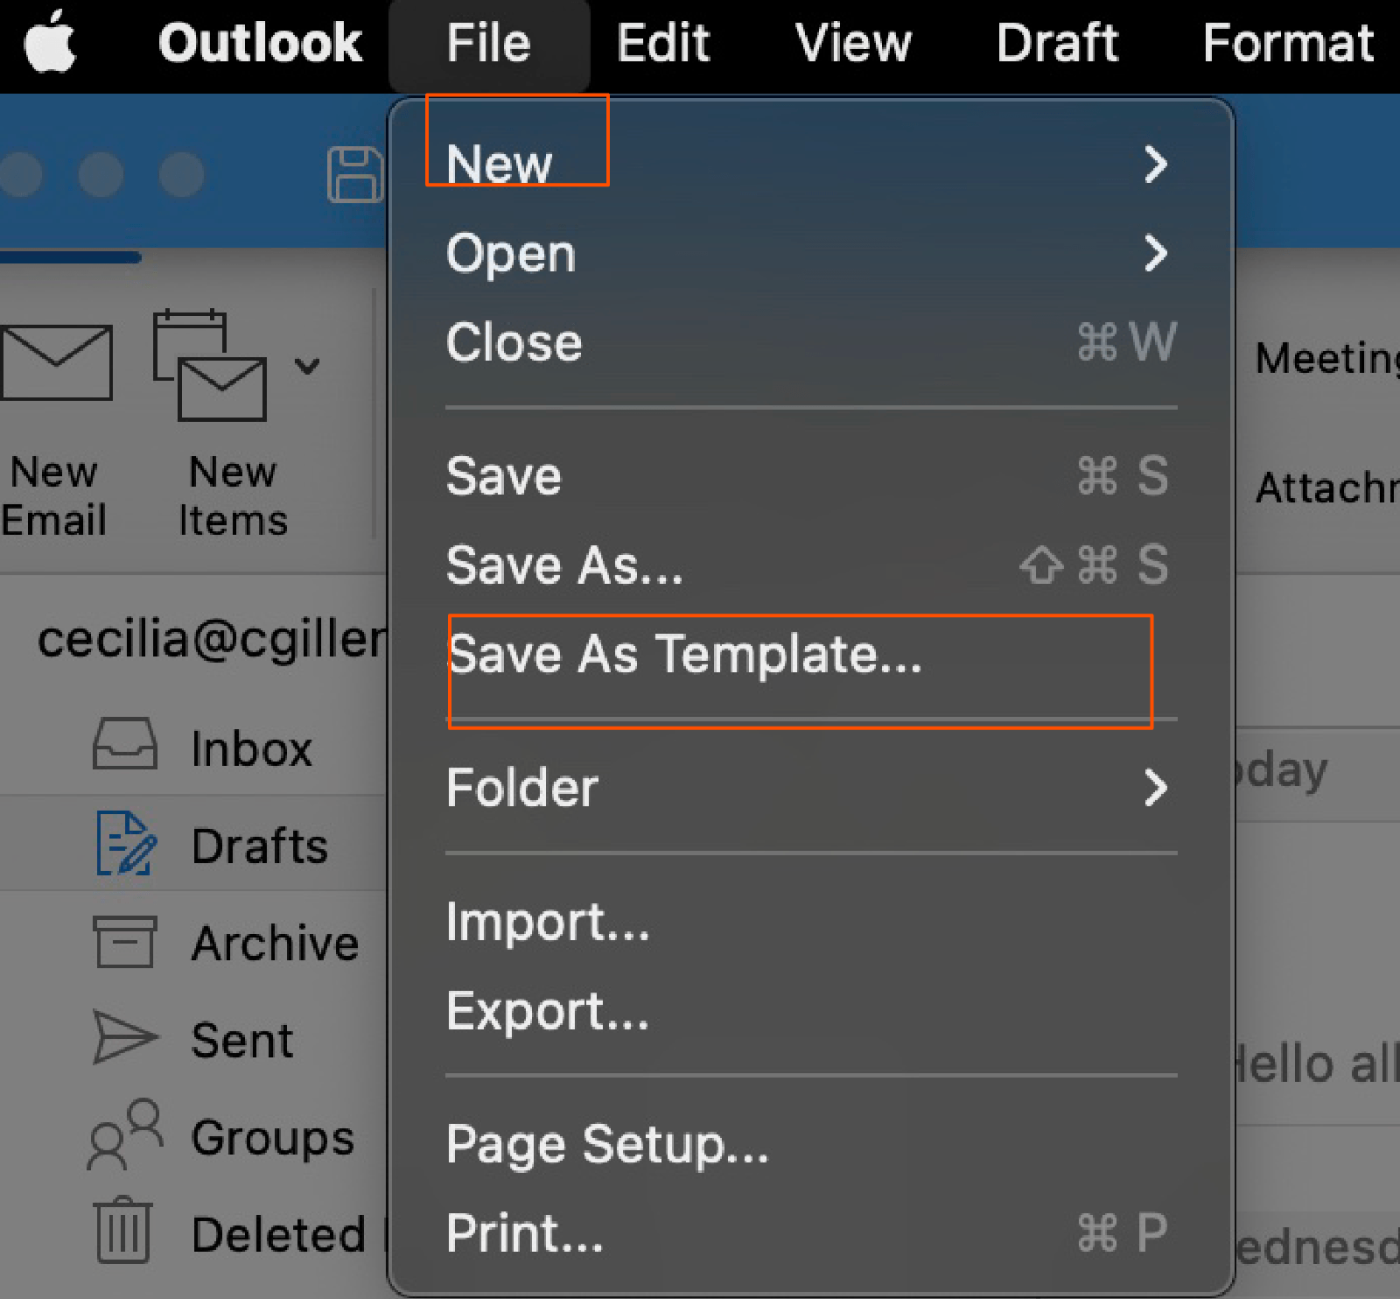 Screenshot showing how to save a message as a template in Outlook.